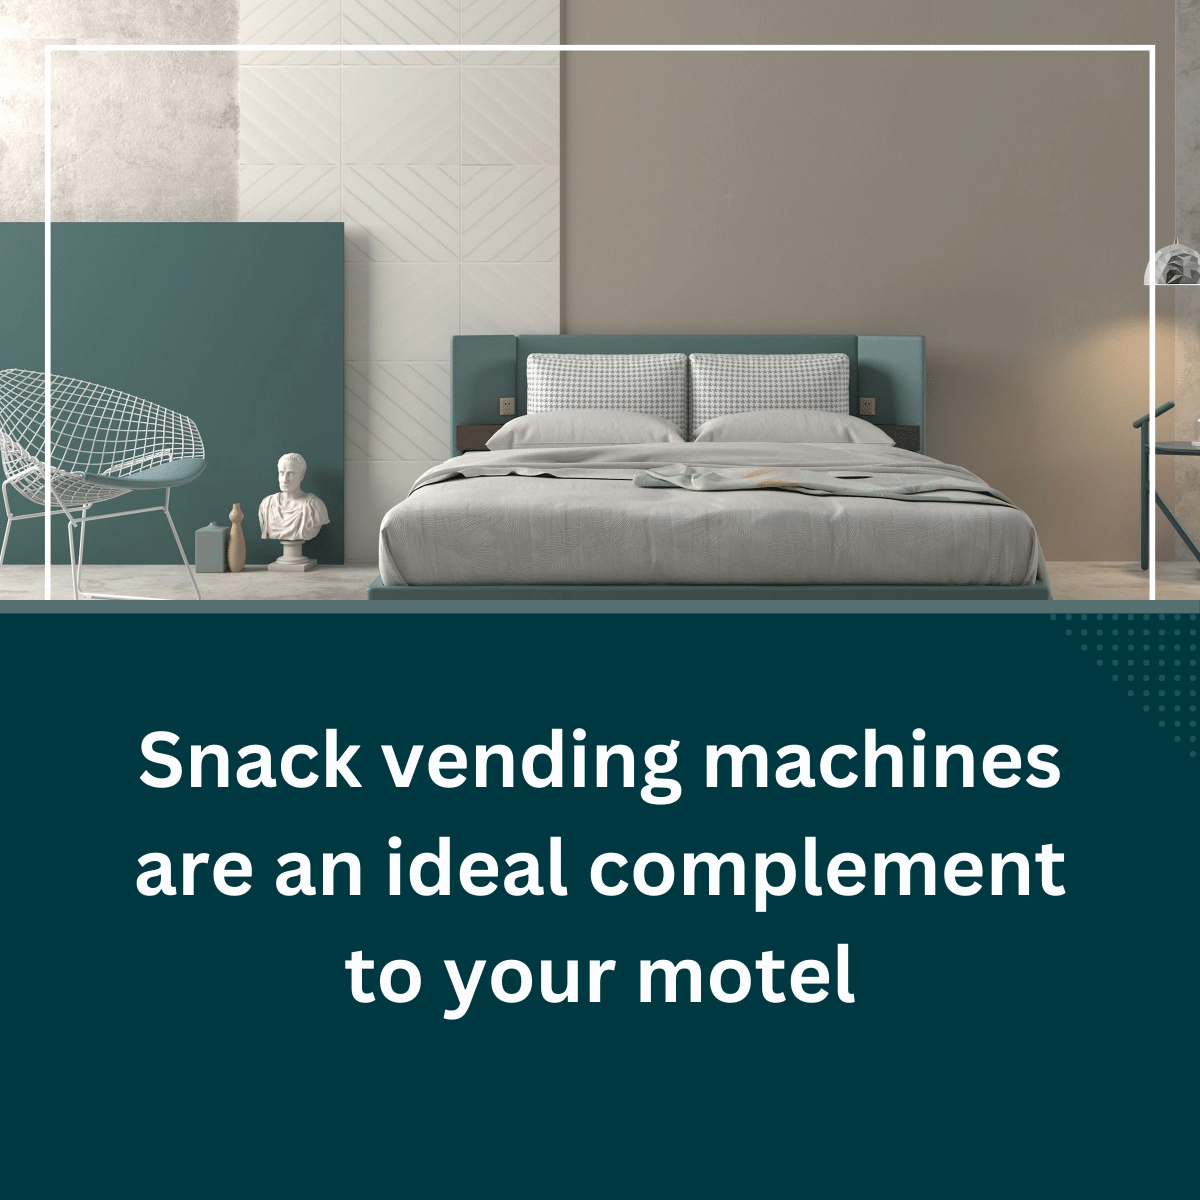 SNACK VENDING MACHINES MAKE THE PERFECT ADDITION TO YOUR MOTEL